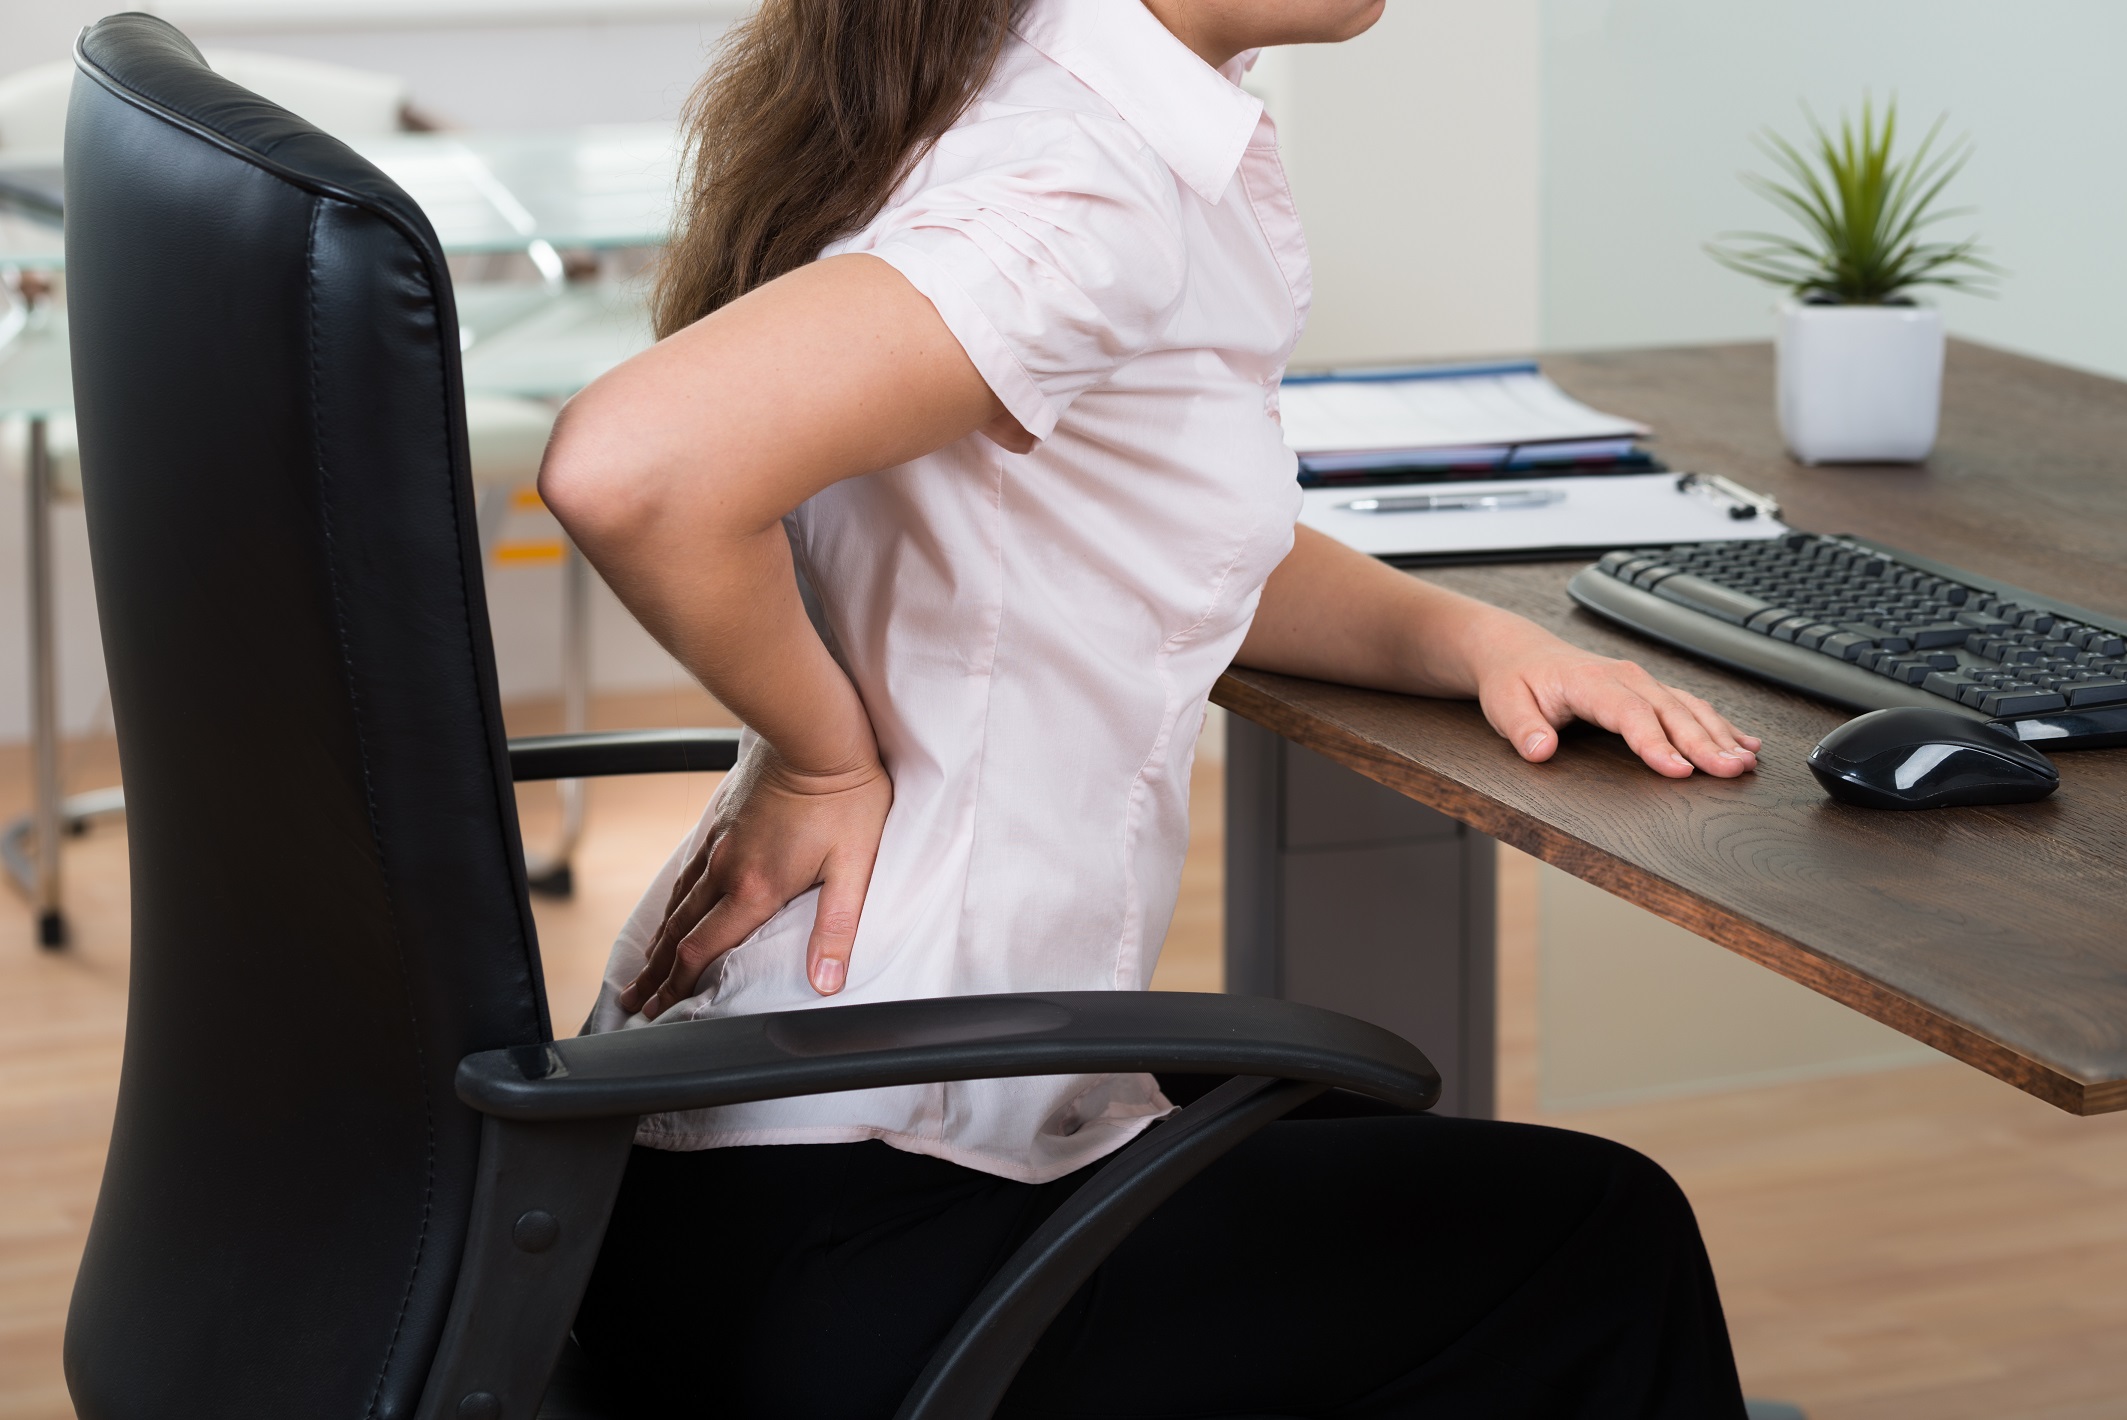 The 3 main reasons why you should sit properly at work 2